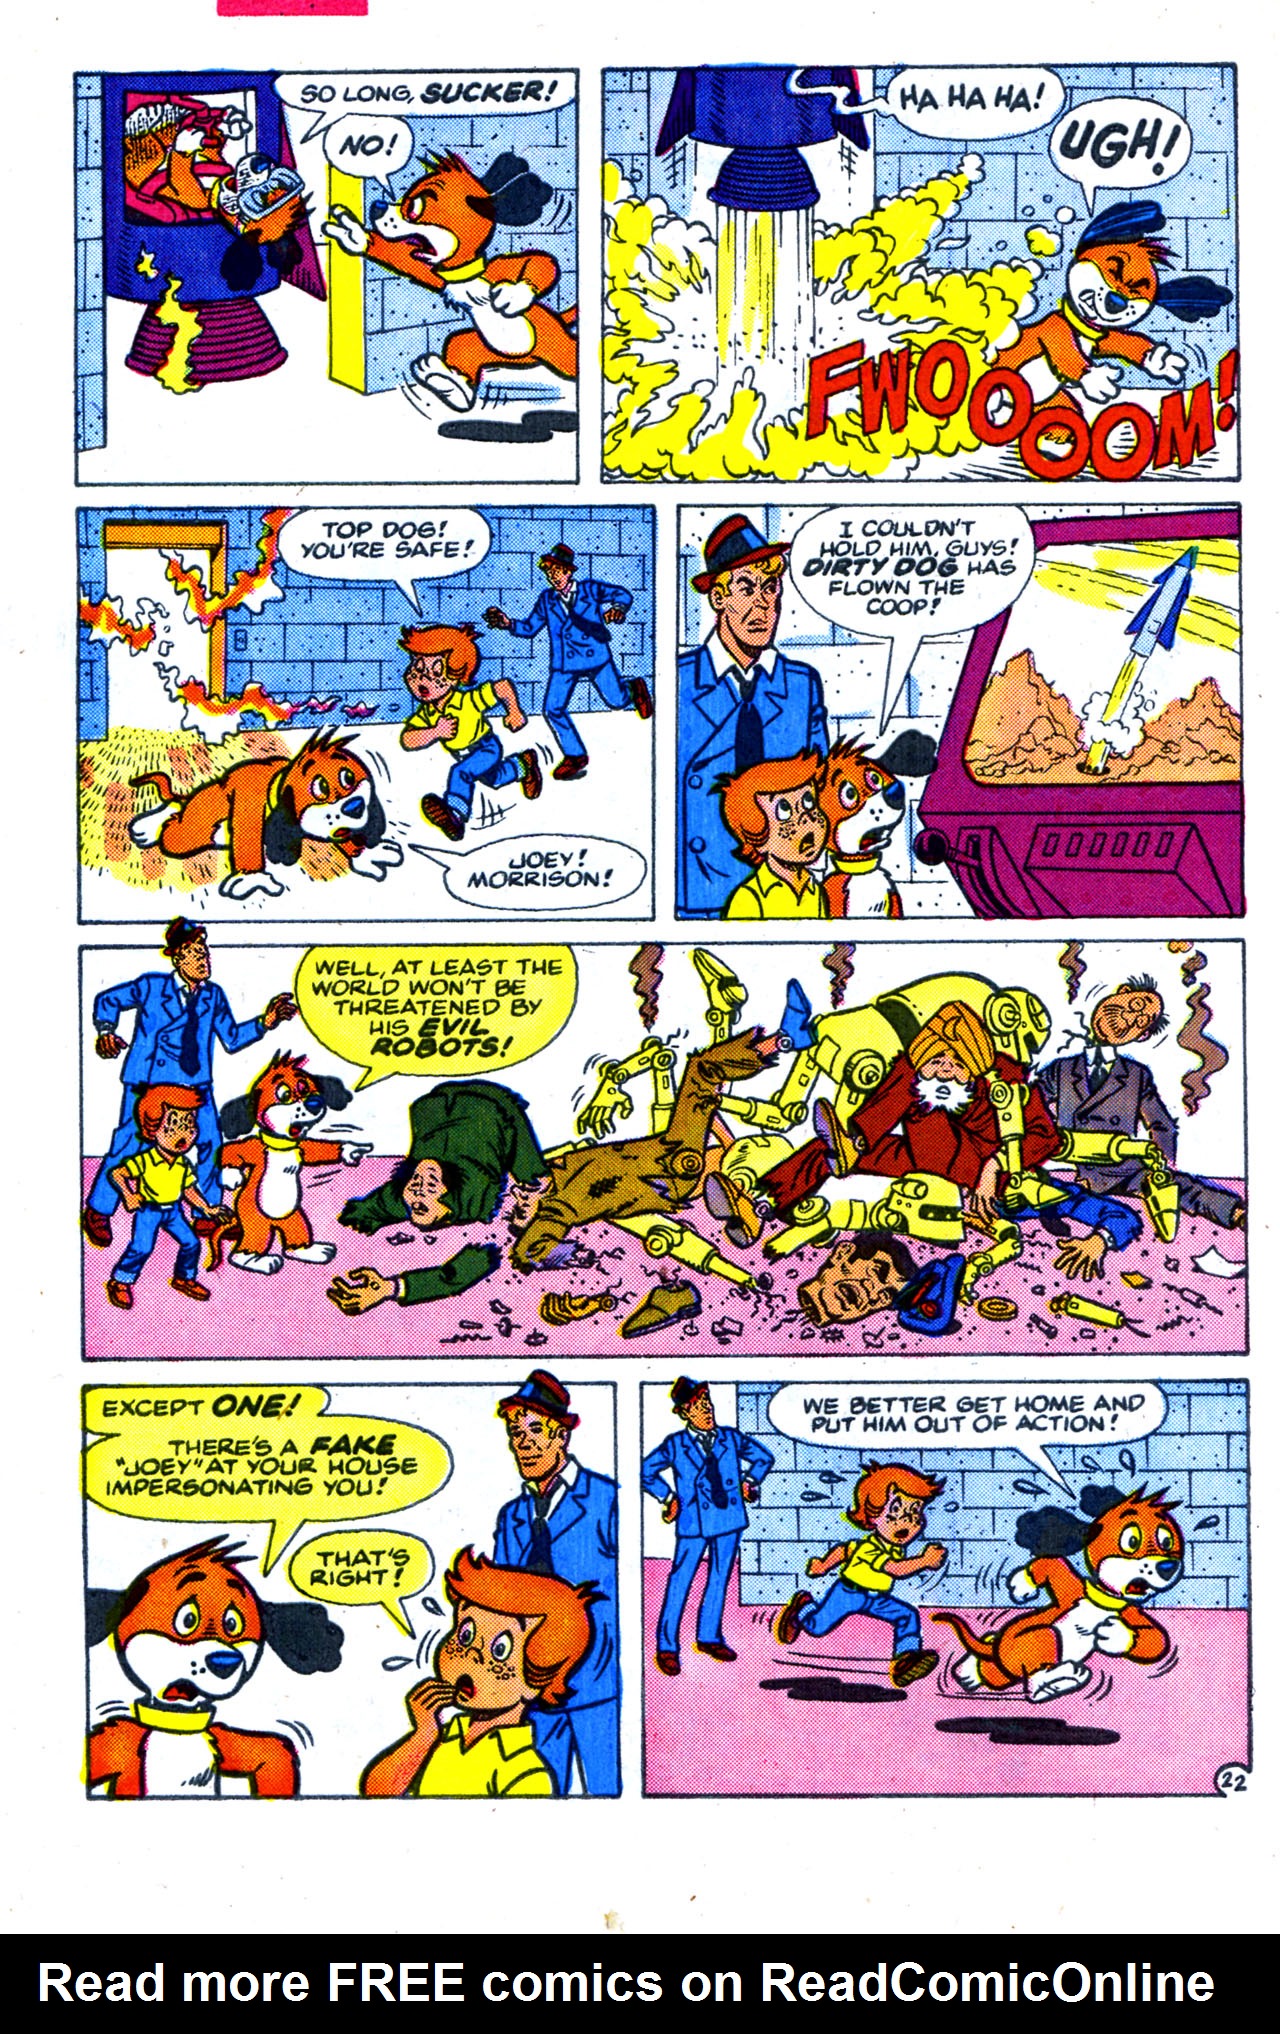 Read online Top Dog comic -  Issue #11 - 31